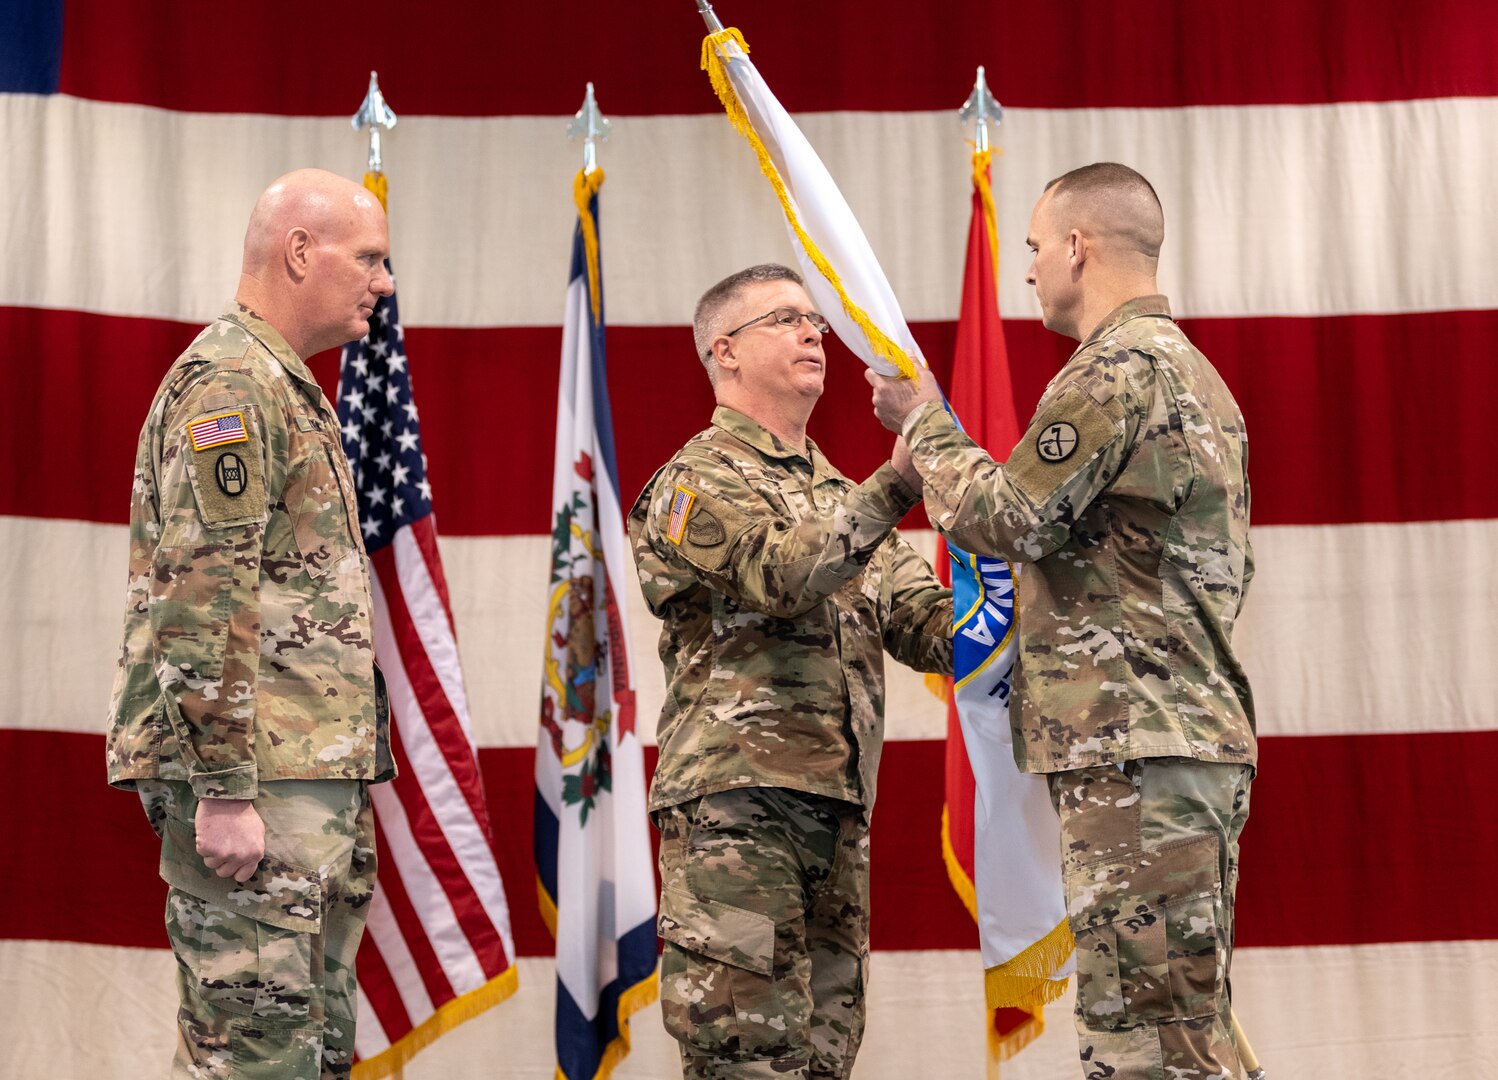 Command Sgts. Maj. James "Dusty" Jones, Phillip Cantrell, and James Allen took part in change of responsibility ceremonies held Feb. 2, 2019 at the WVNG Joint Forces Headquarters in Charleston.